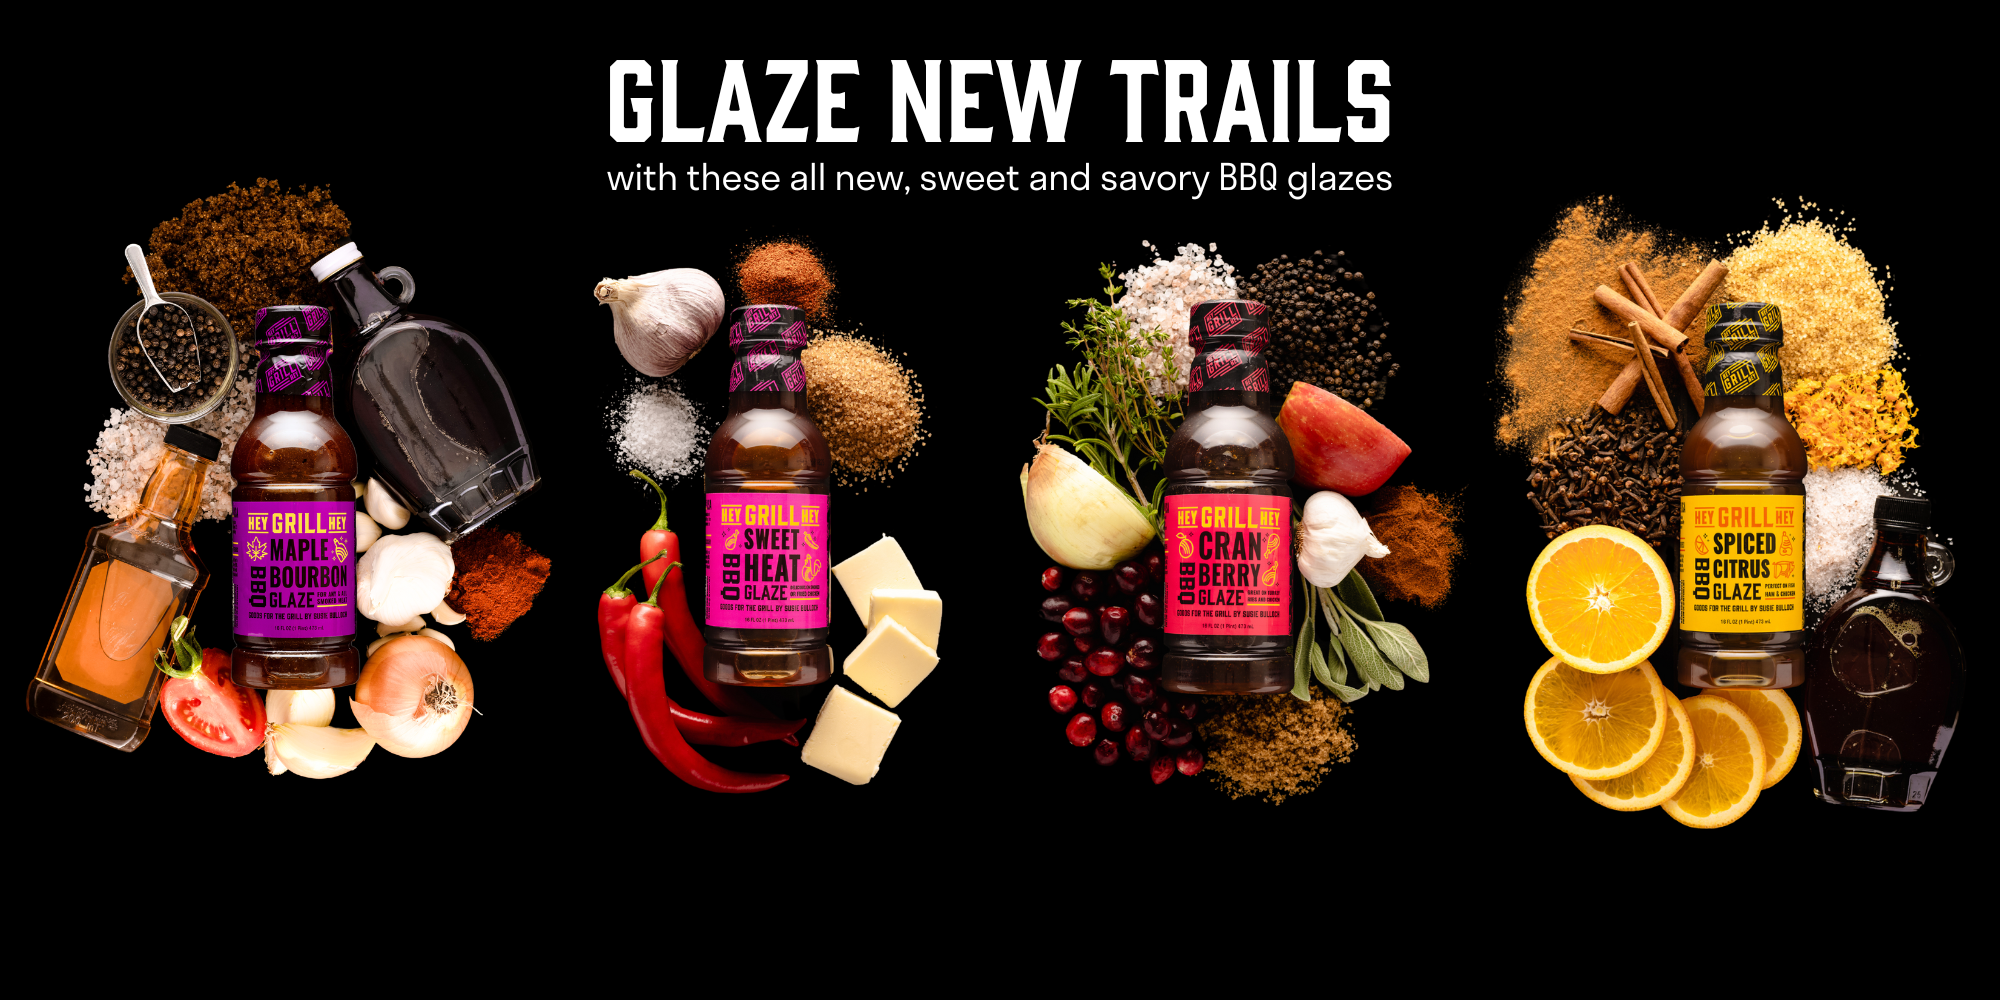 Image of 4 glaze bottles surrounded by complementary ingredients with header text that reads "Glaze New Trails with these all new, sweet and savory BBQ glazes"